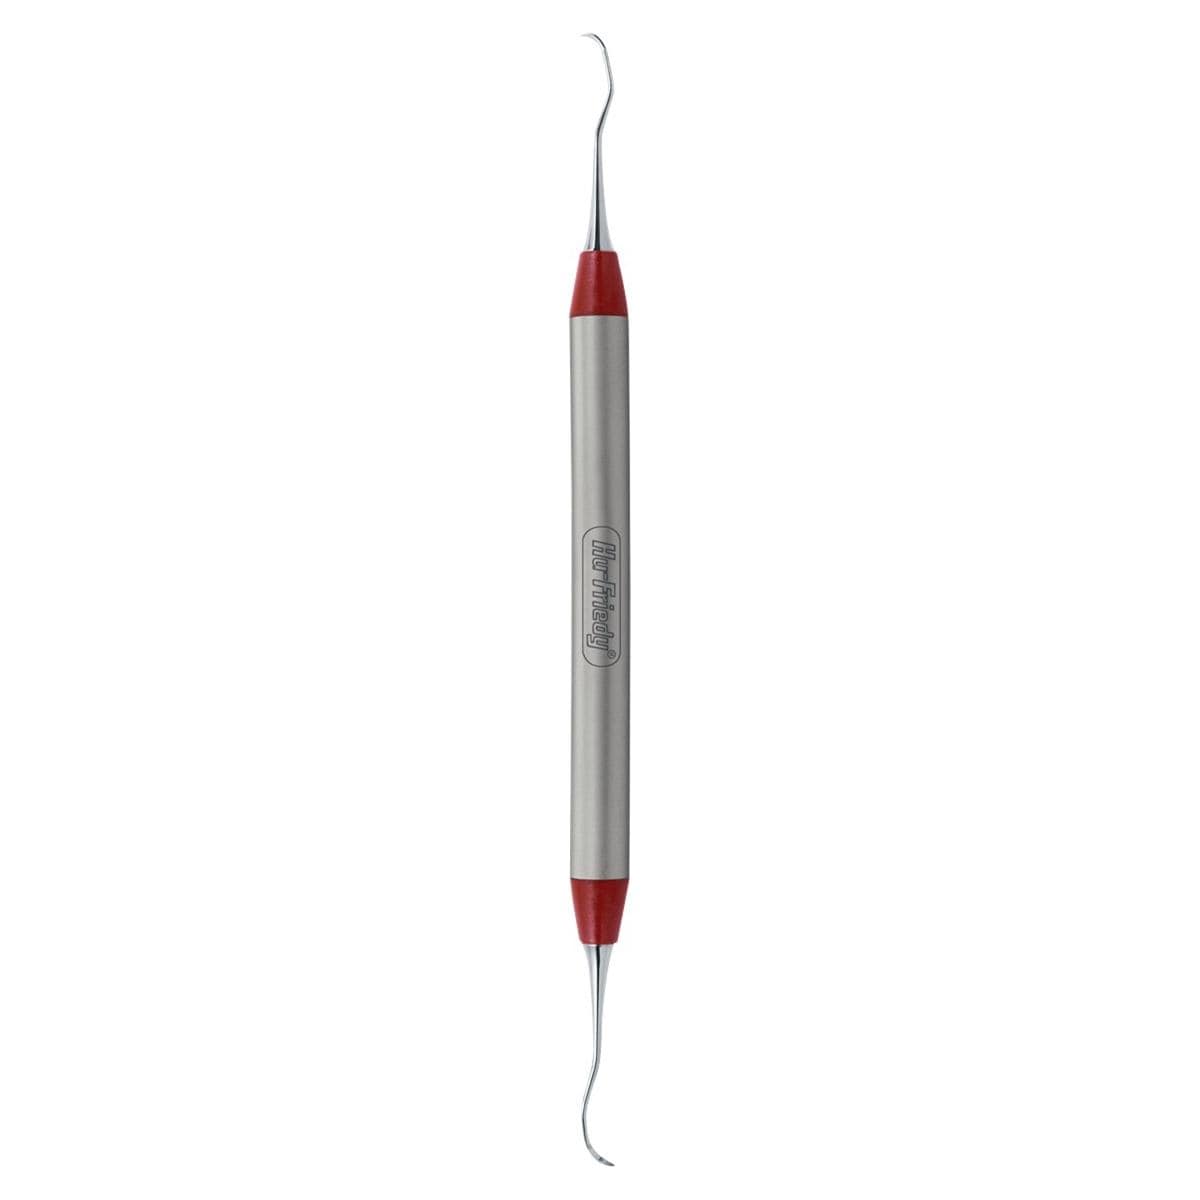 Scaler - EverEdge 2.0, Color Cones smooth handle - Posterior 204SD, S204SDCCHE2